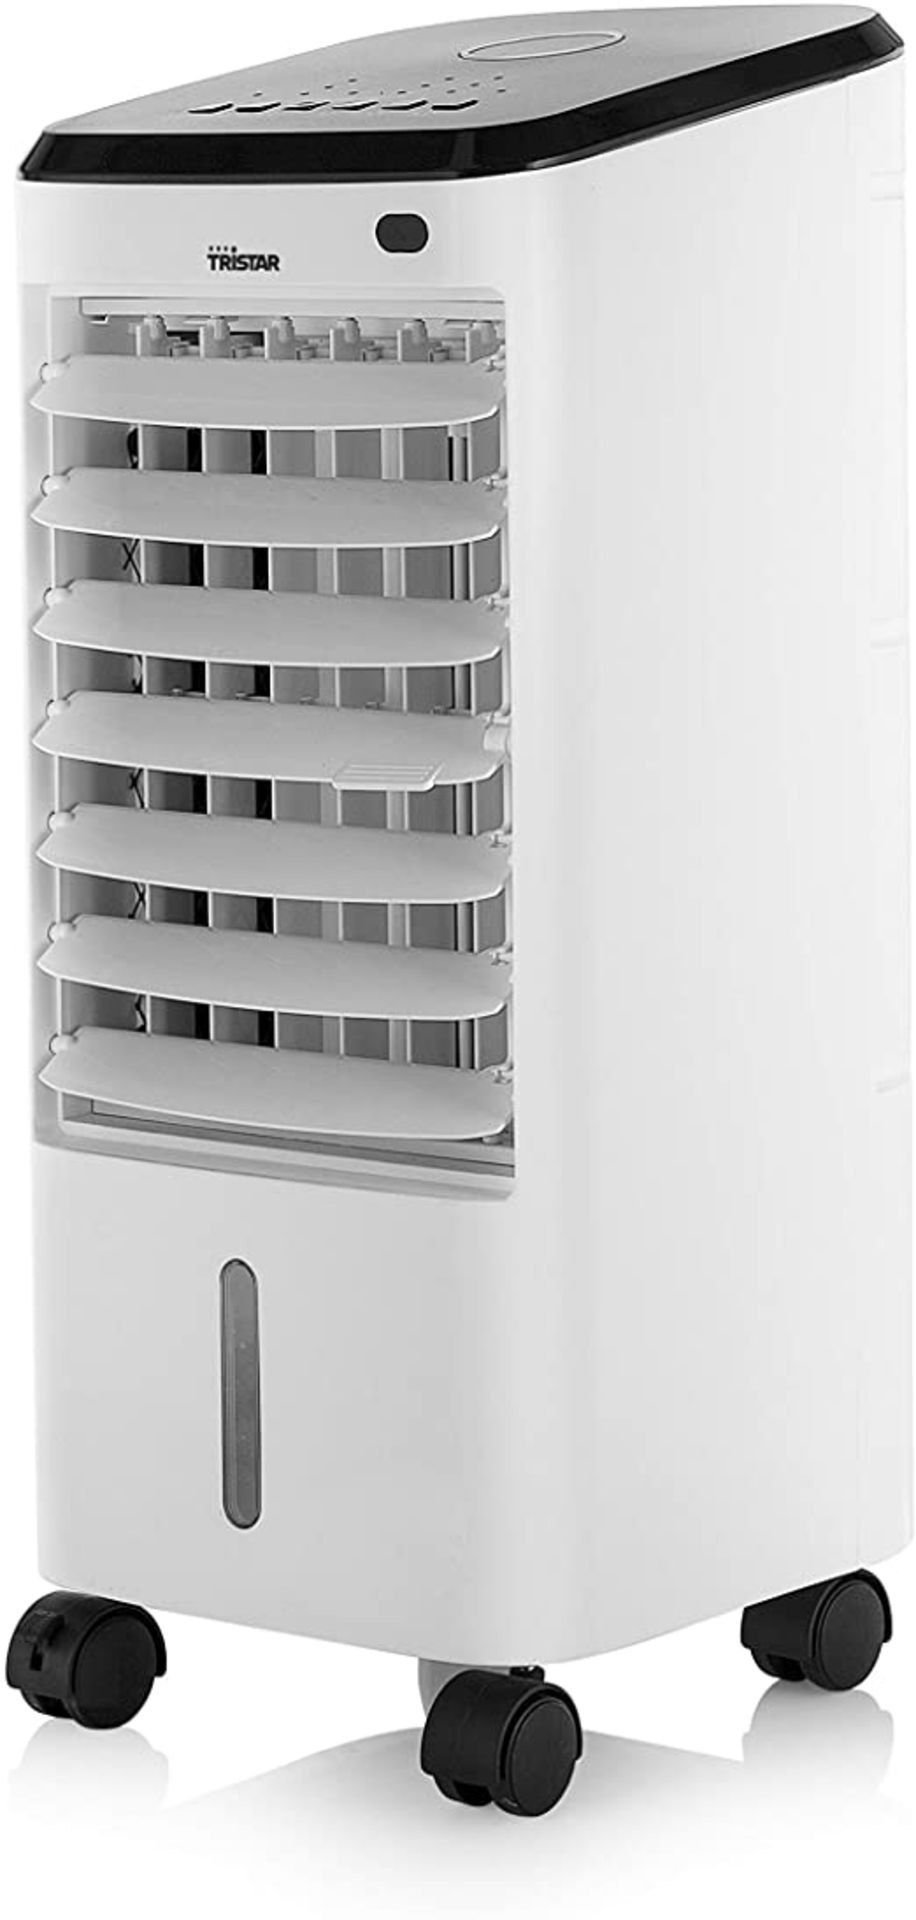 Tristar AT-5446BS Portable Air Cooler, 4L Watertank with 2 Ice Boxes, 3 Speeds, Oscillation, Timer